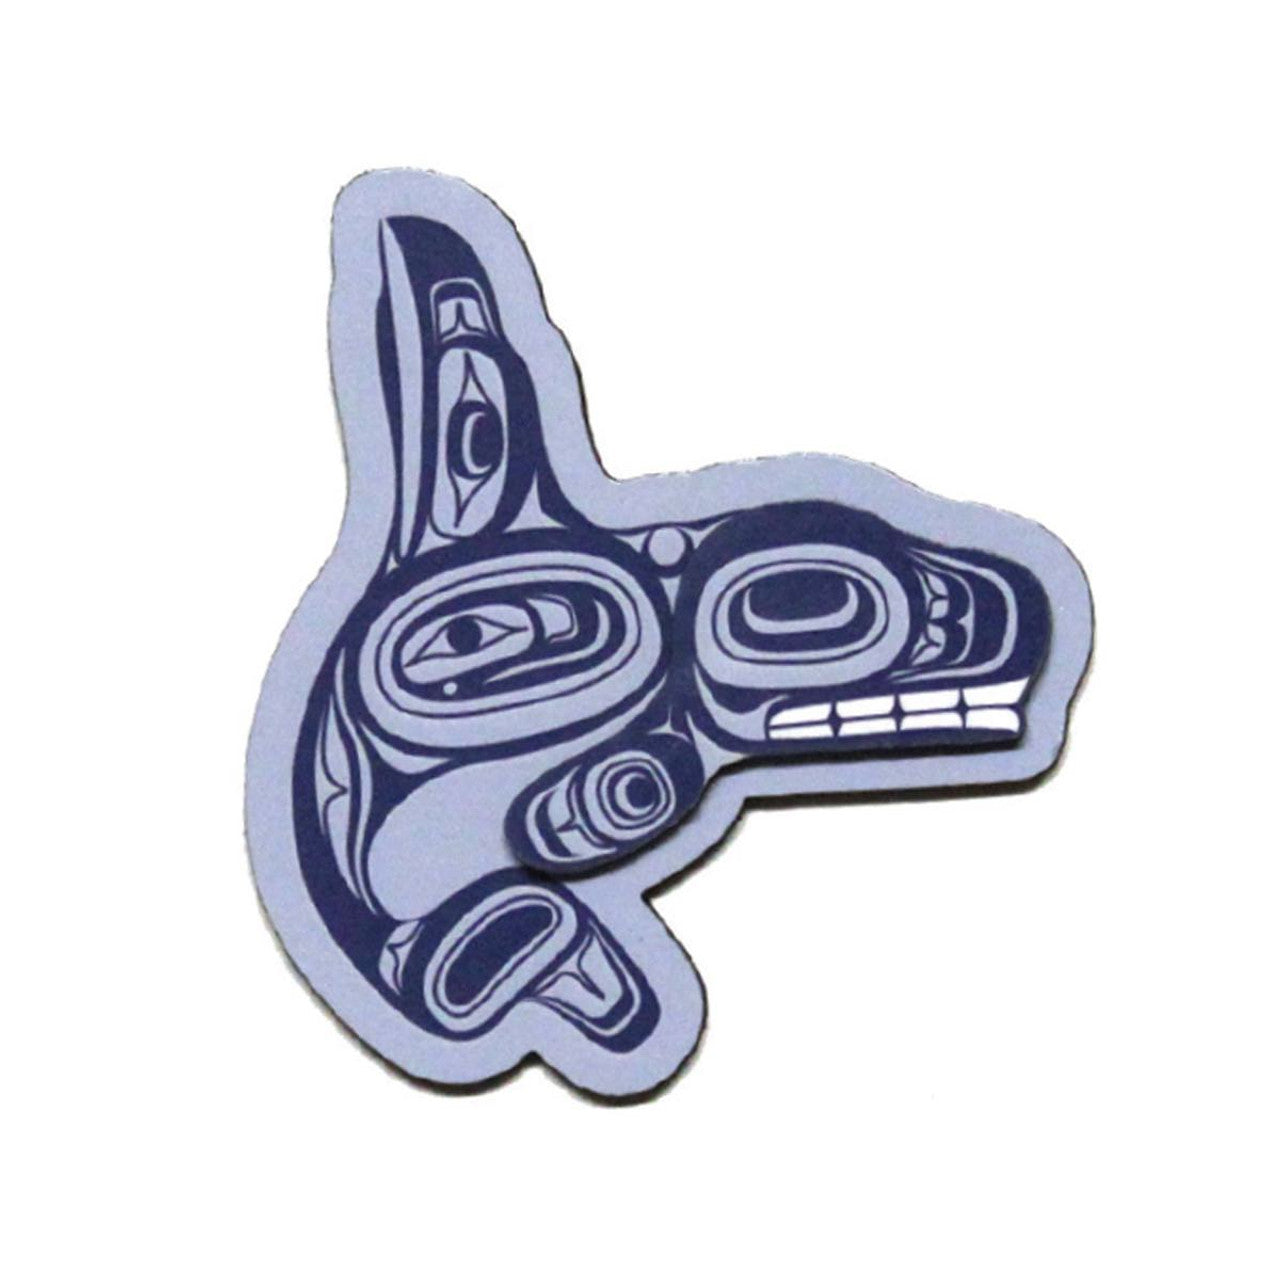 3D MAGNETS - Ernest Swanson Whale blue - M364 - House of Himwitsa Native Art Gallery and Gifts